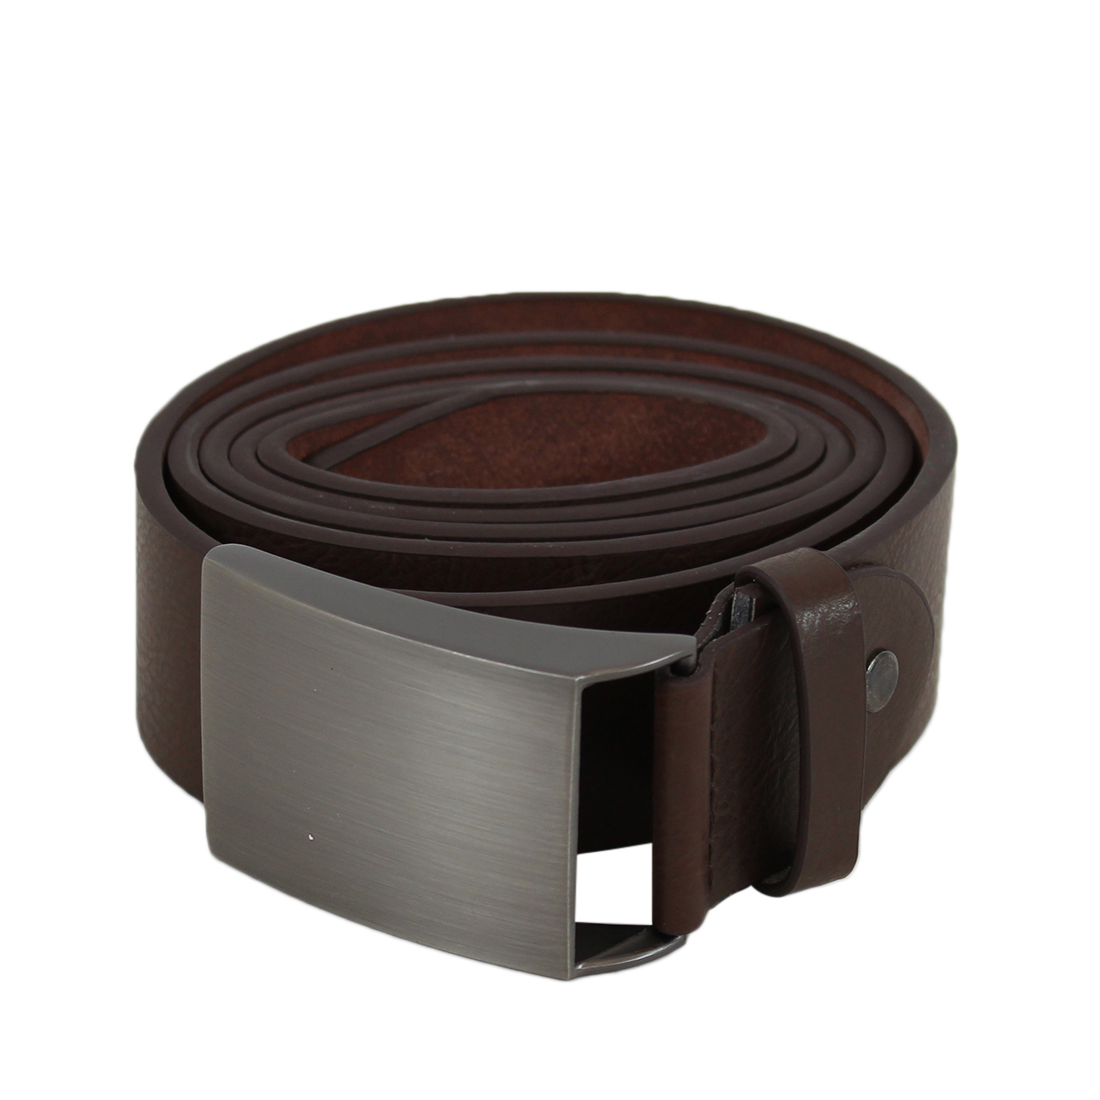 Plain wide leather belt with metal buckle